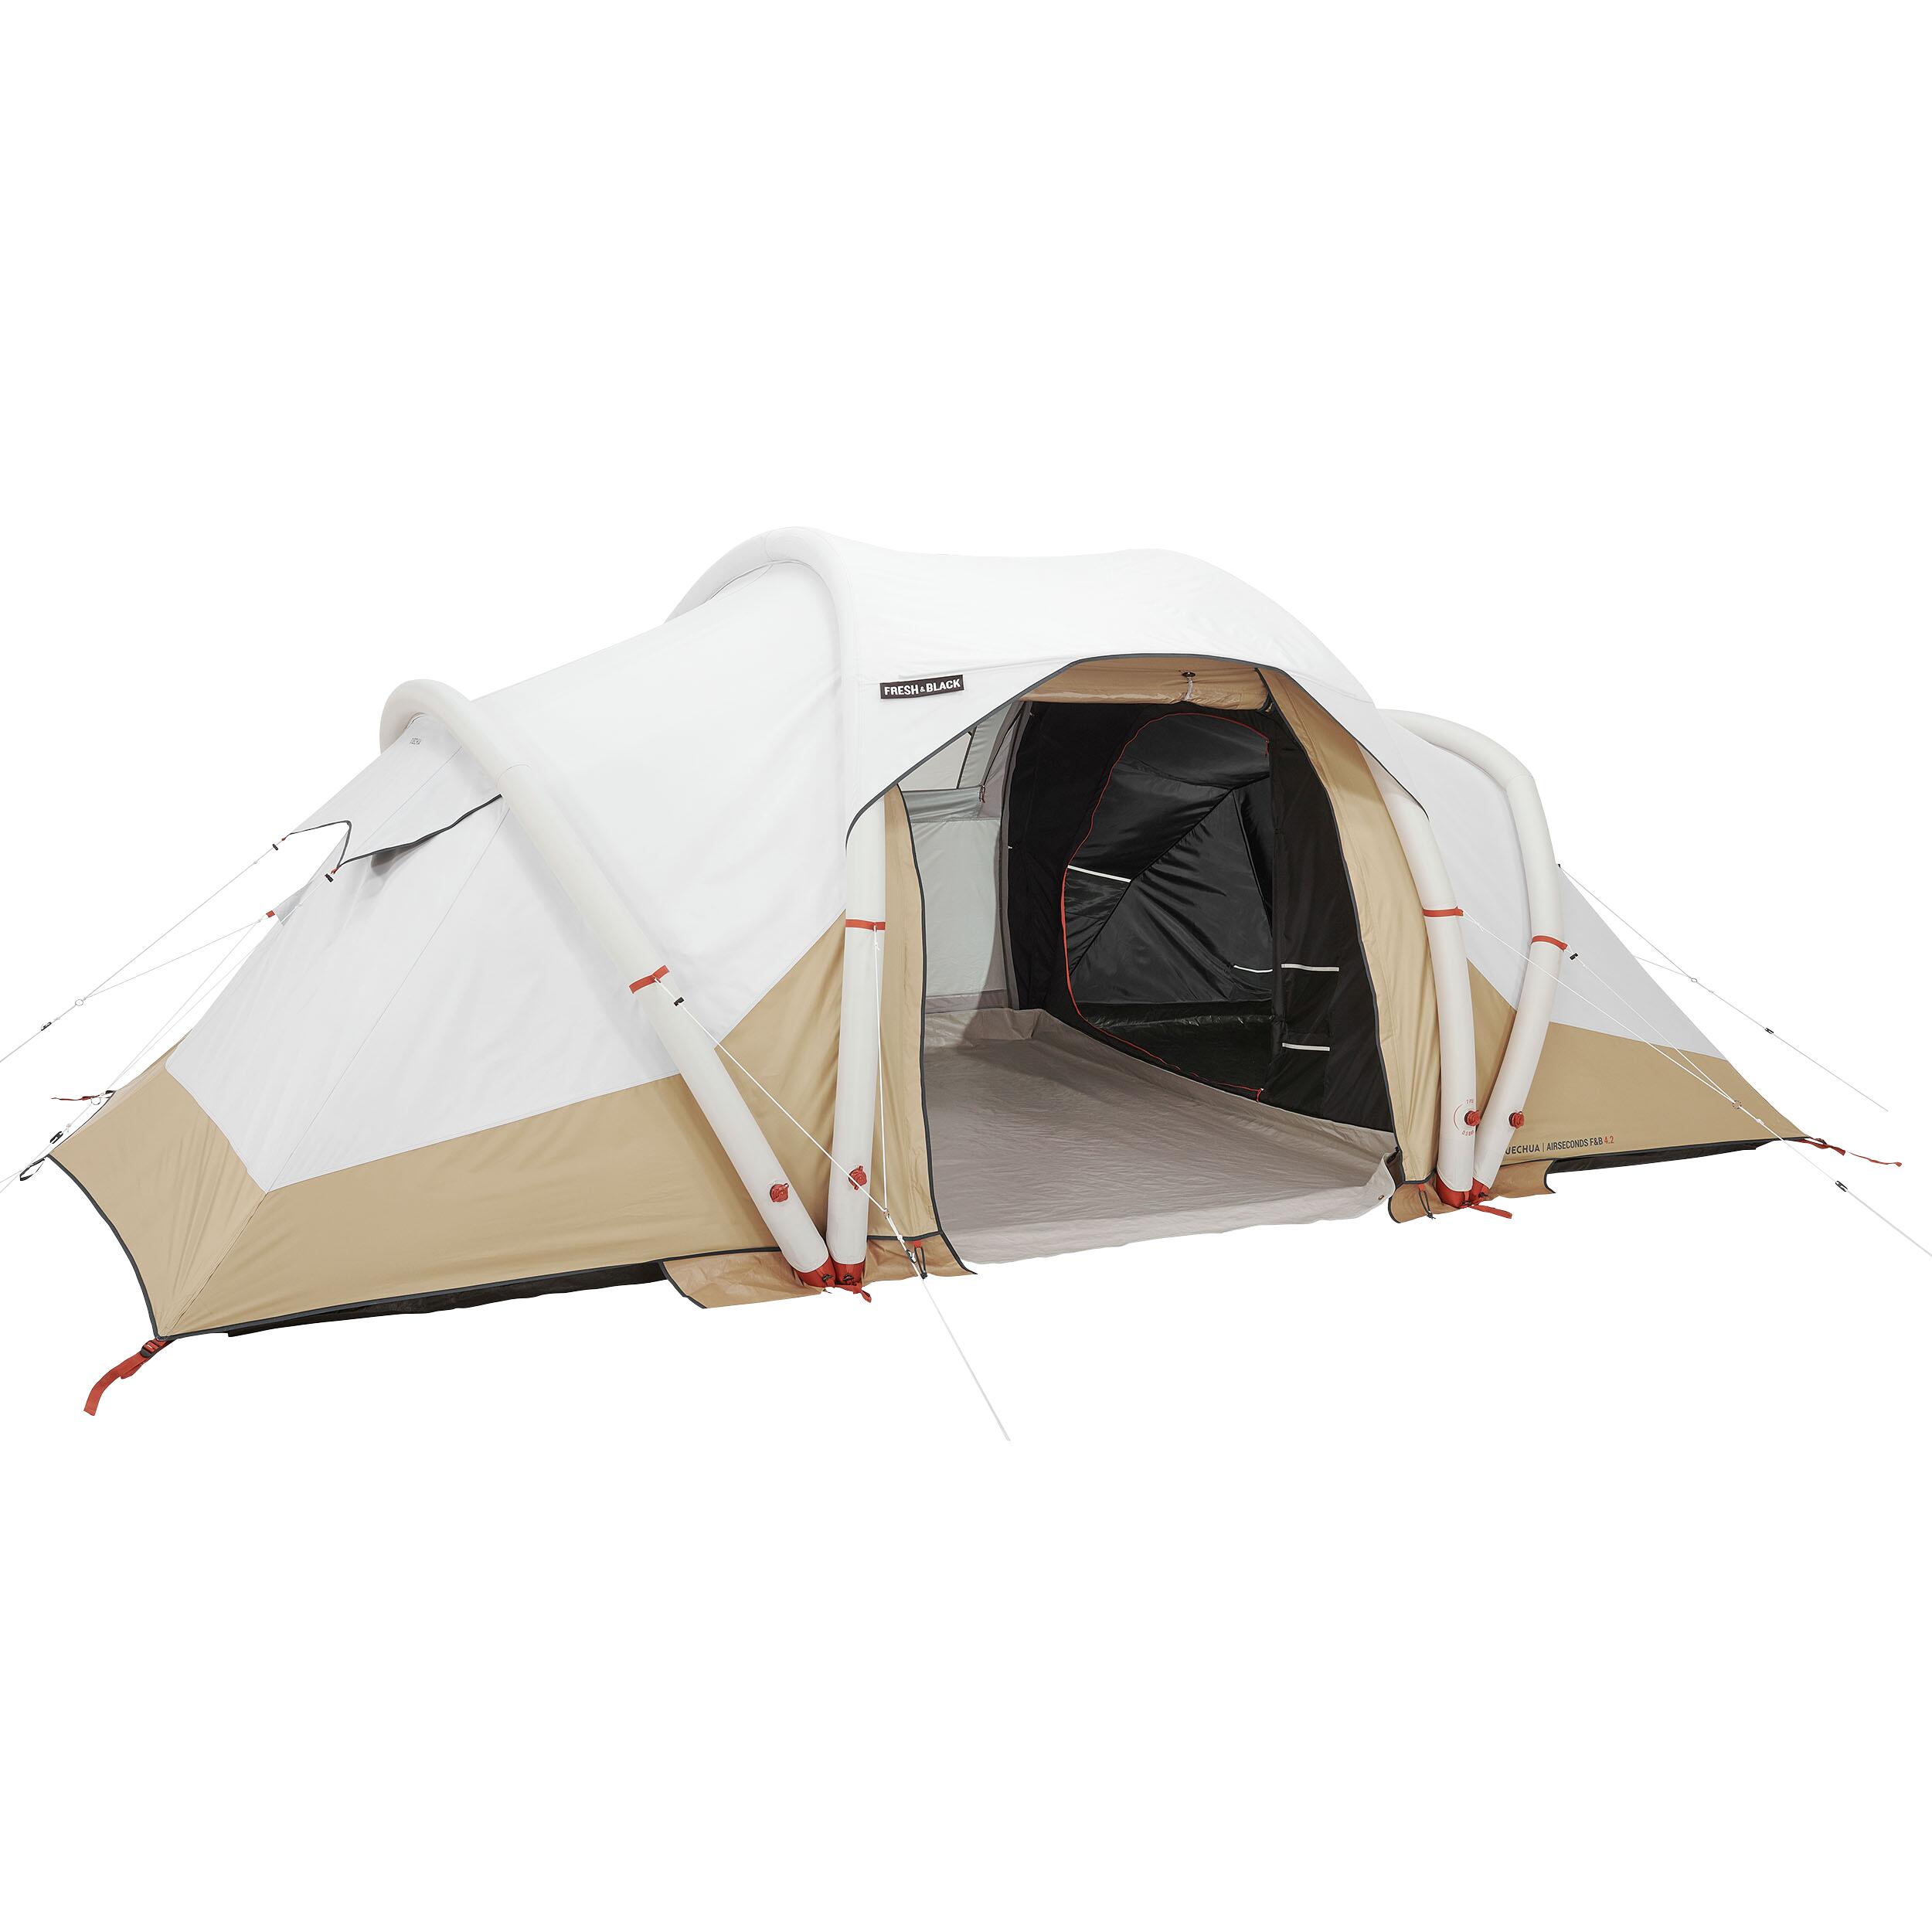 Inflatable camping tent - Air Seconds 4.2 F&B - 4 Person - 2 Bedroom 25/80